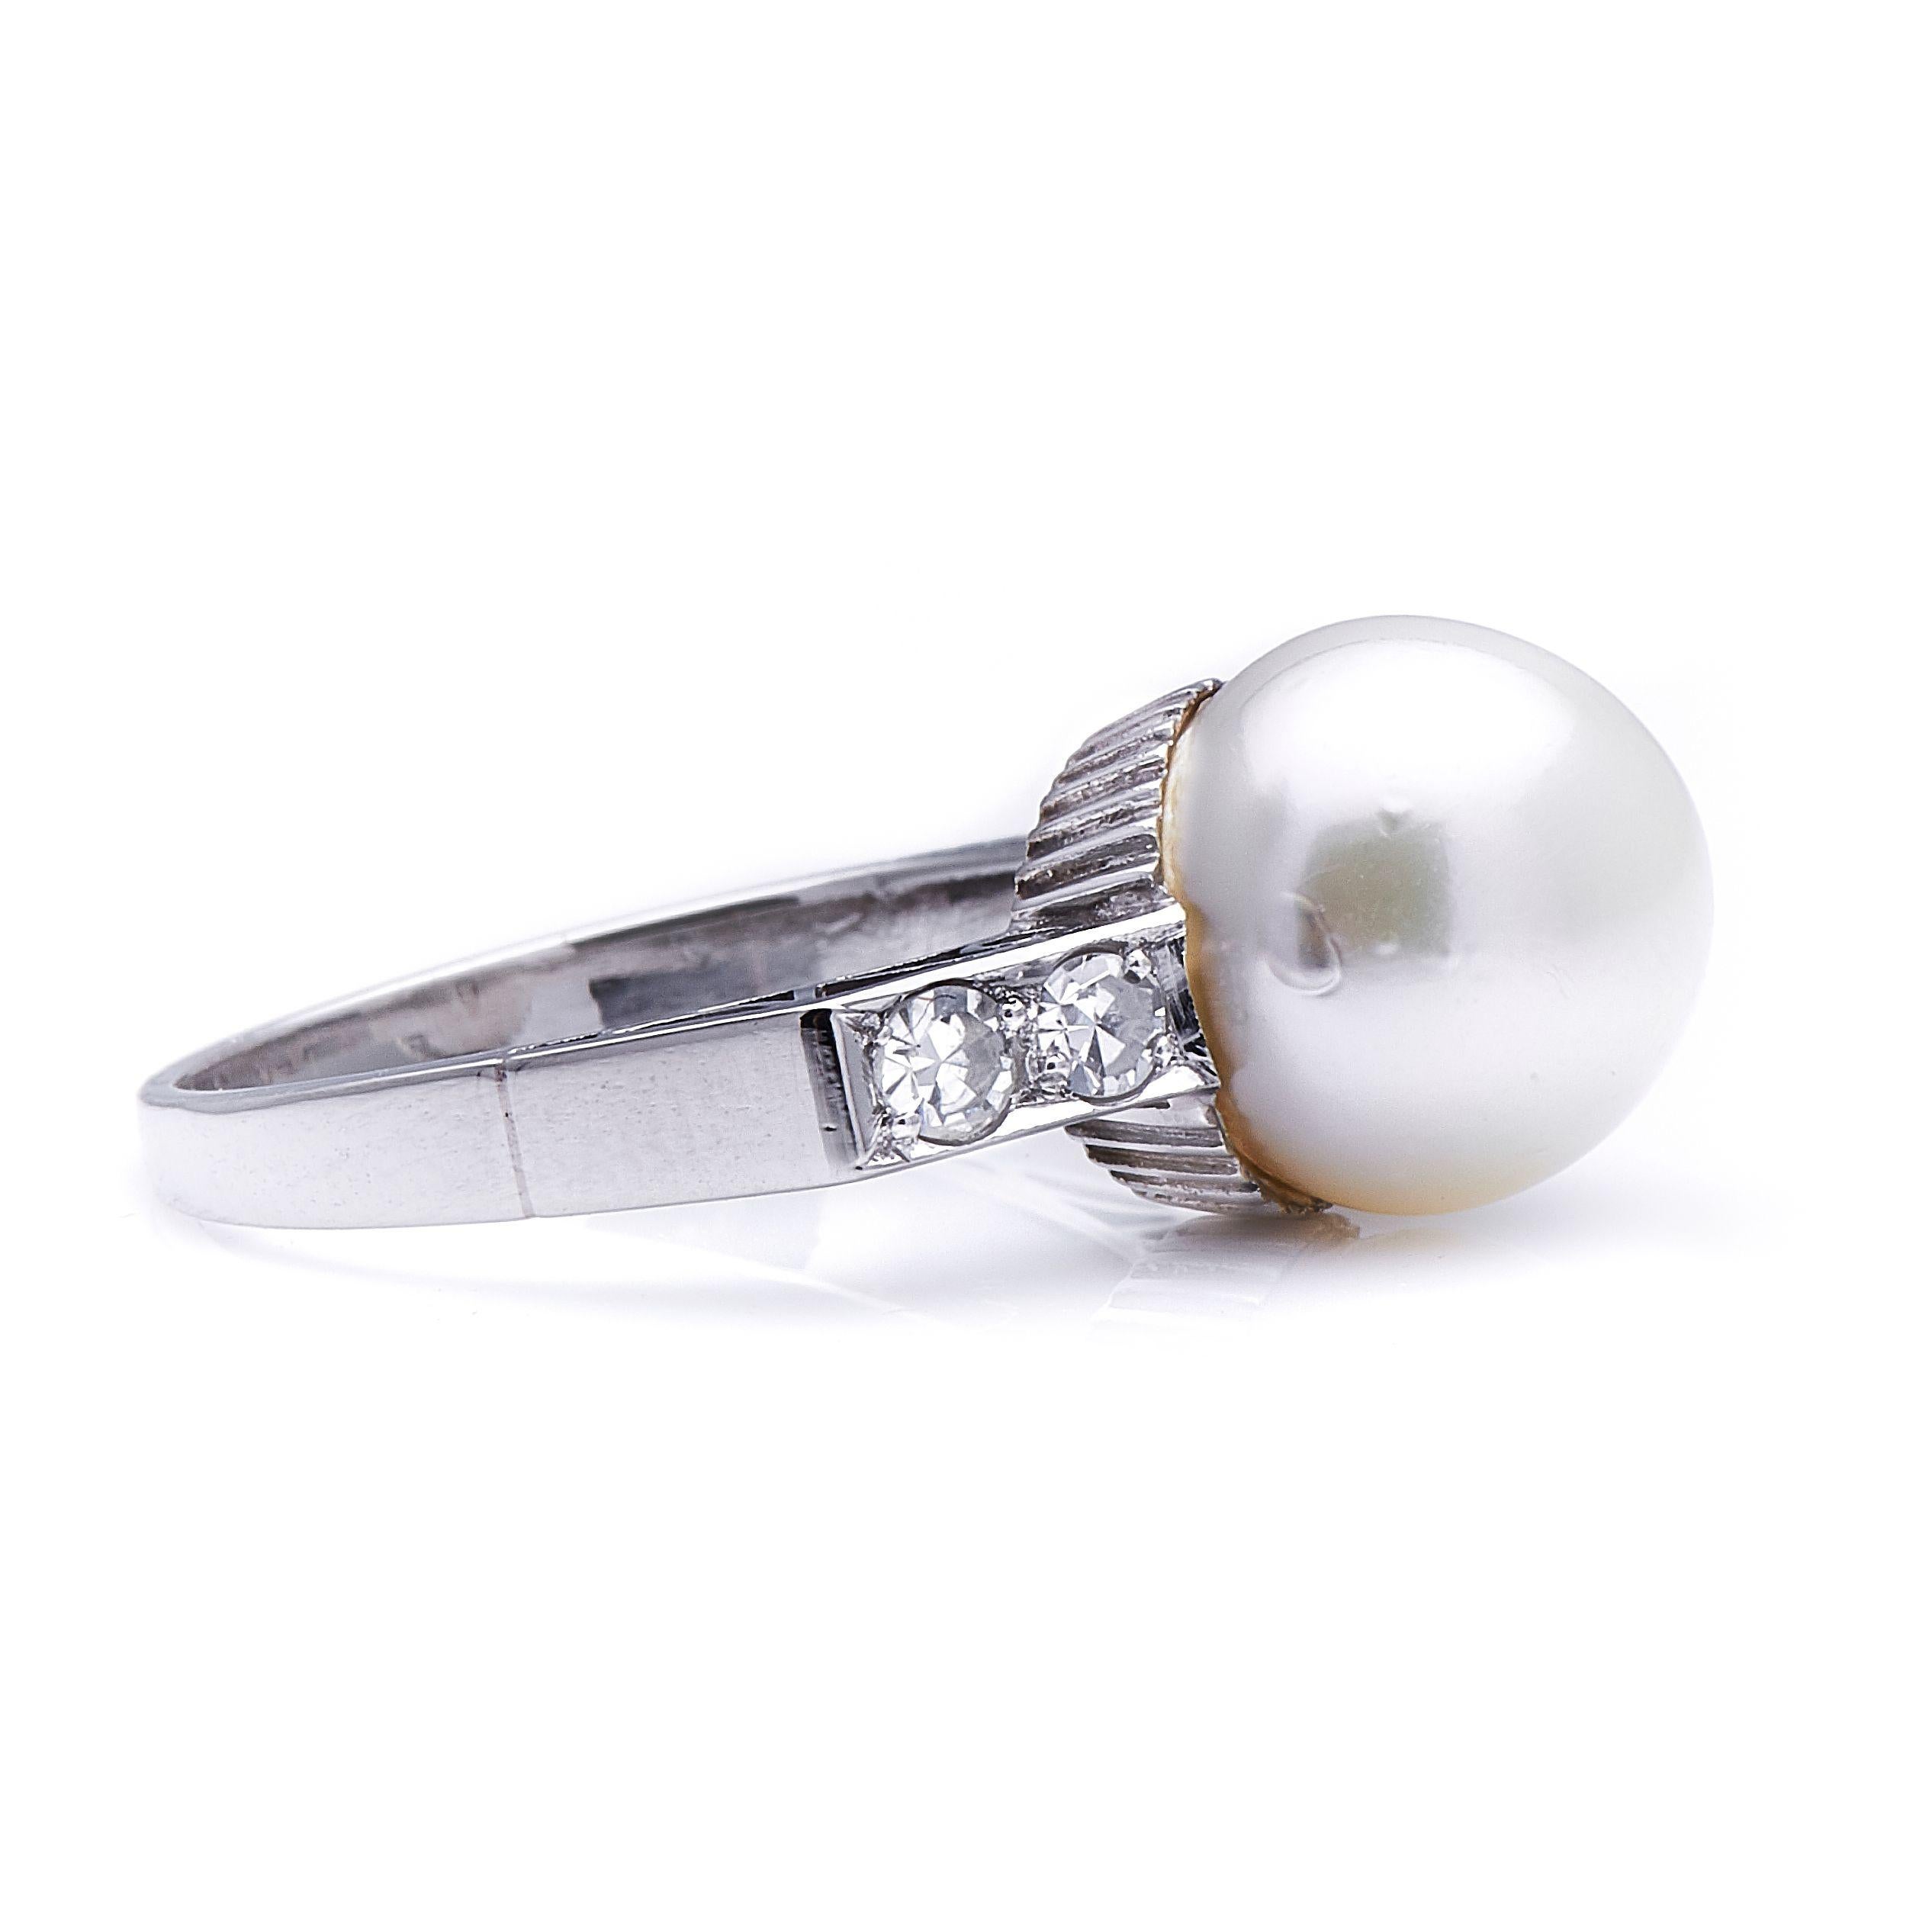 South Sea cultured pearl and diamond ring, circa 1925. South Sea pearls are famous among cultured pearls for their superb quality, and the thickness of their nacre surface. This example is no exception, with a beautiful, smooth and highly lustrous